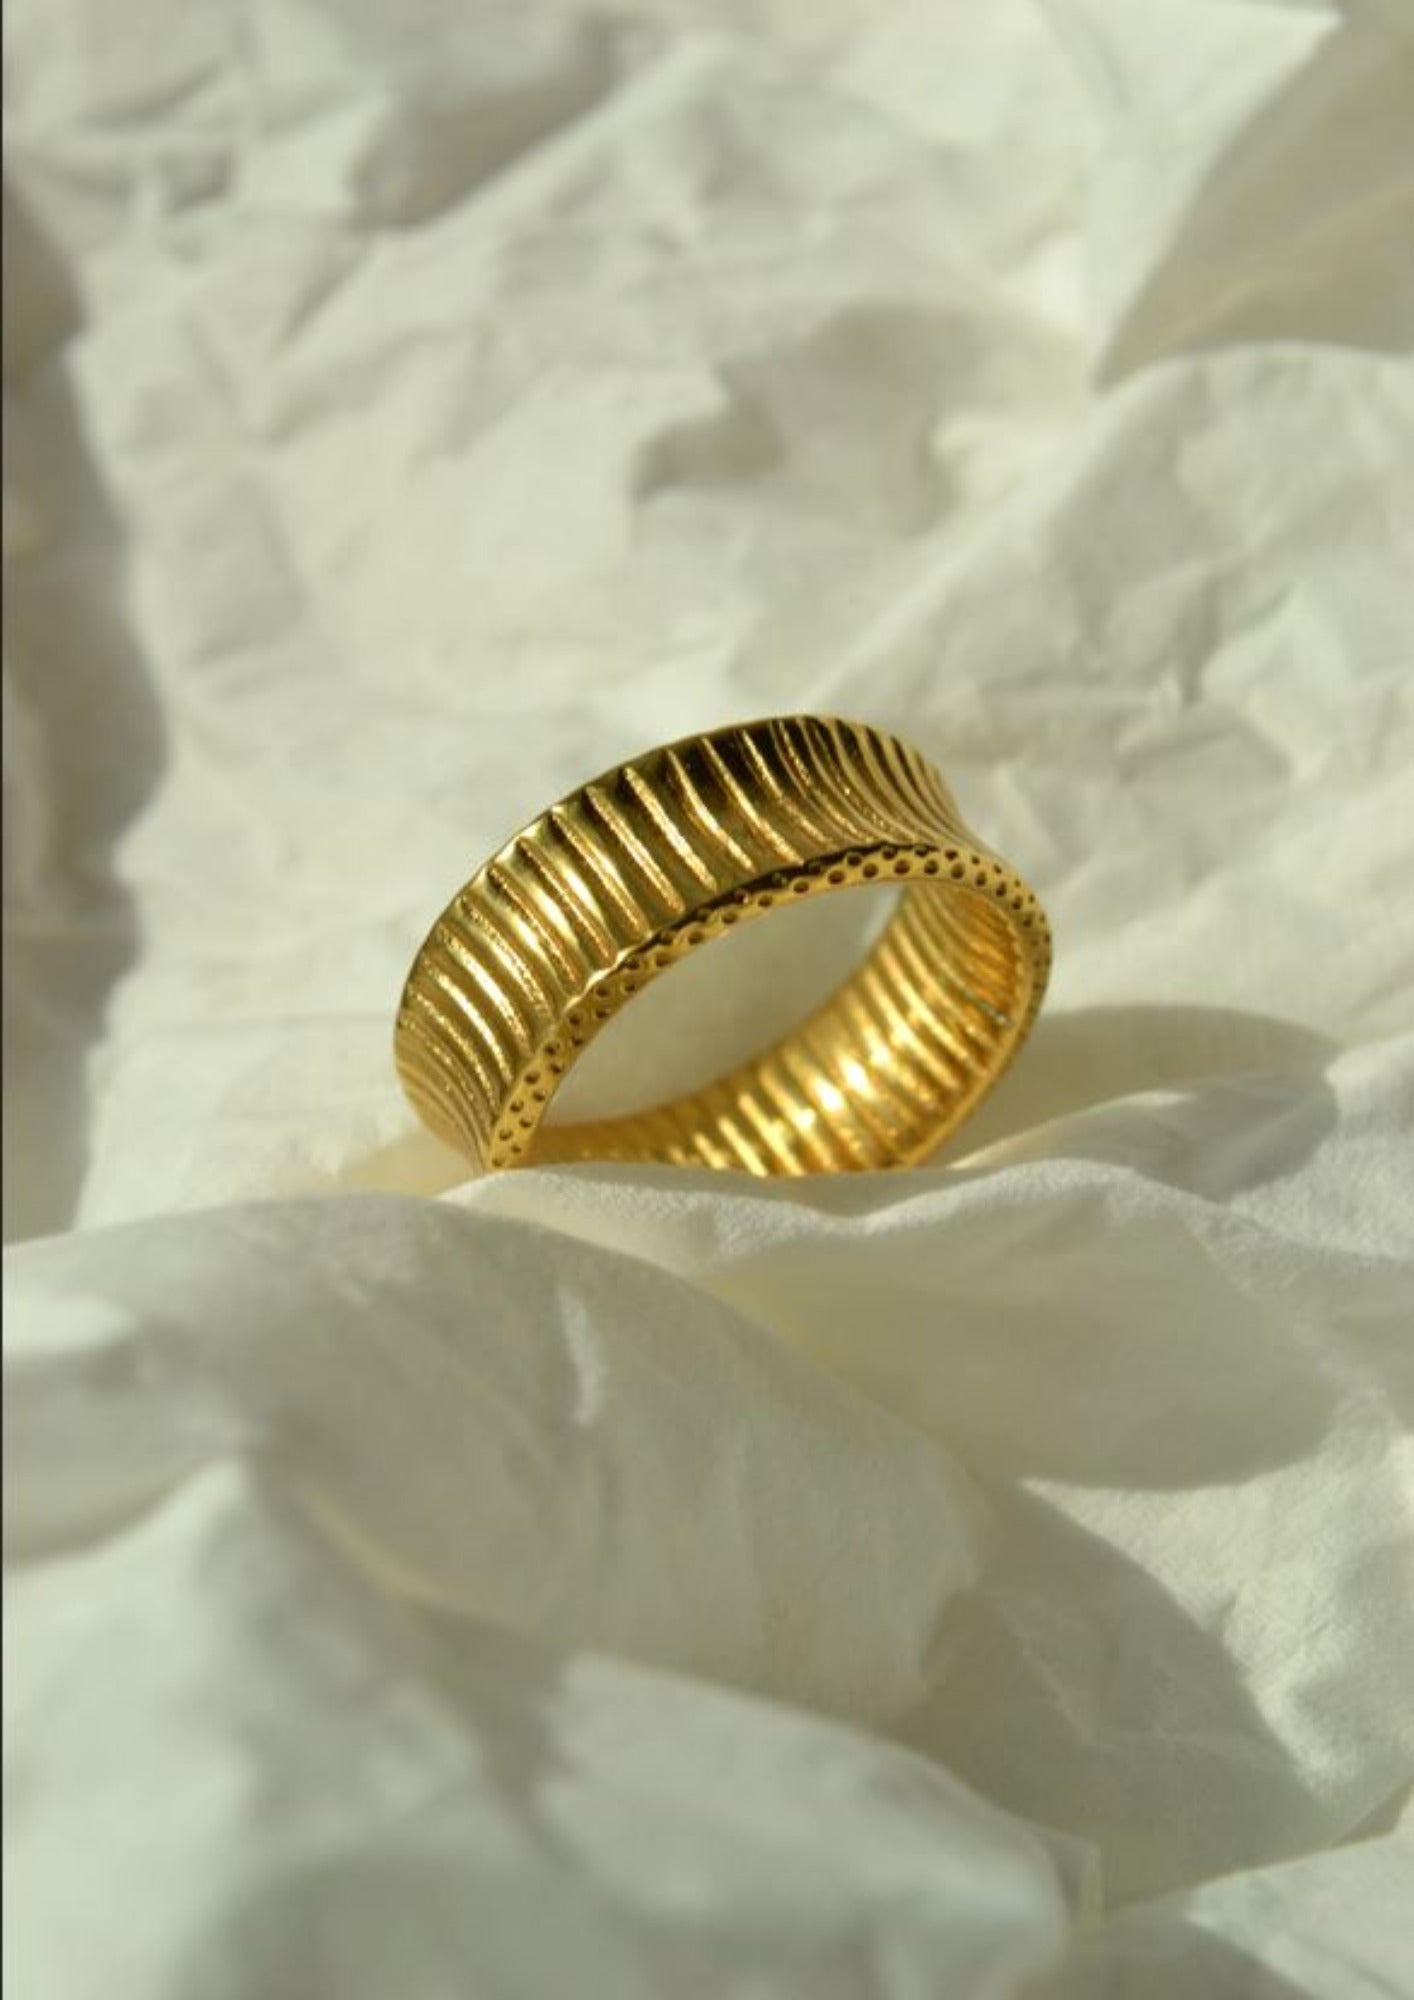 Net Red Wind Wave Edge Diamond Check Ring ring Yubama Jewelry Online Store - The Elegant Designs of Gold and Silver ! 